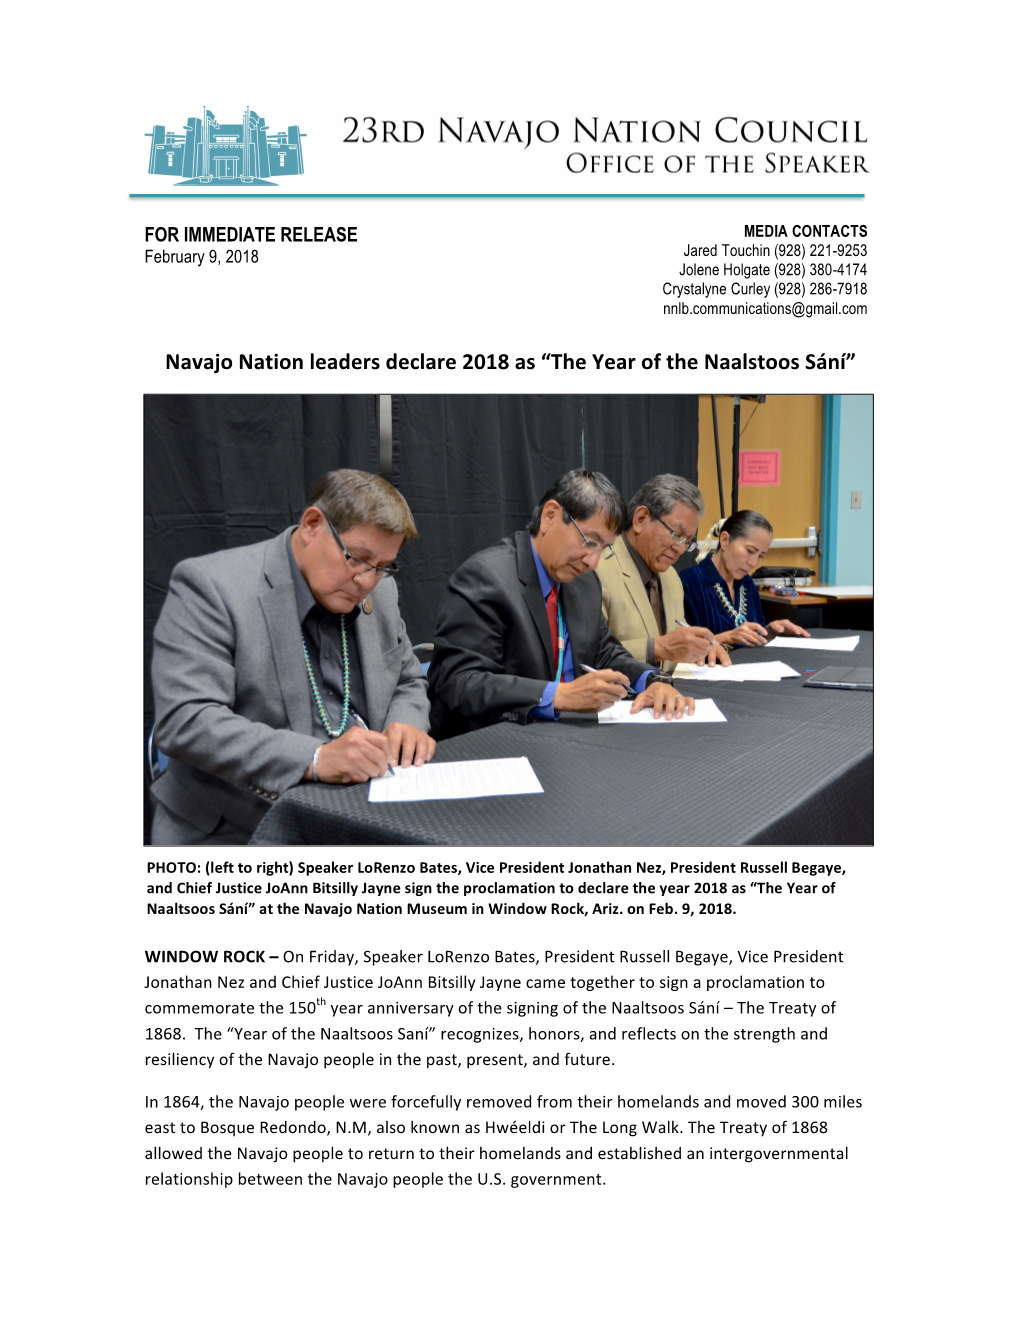 Navajo Nation Leaders Declare 2018 As “The Year of the Naalstoos Sání”